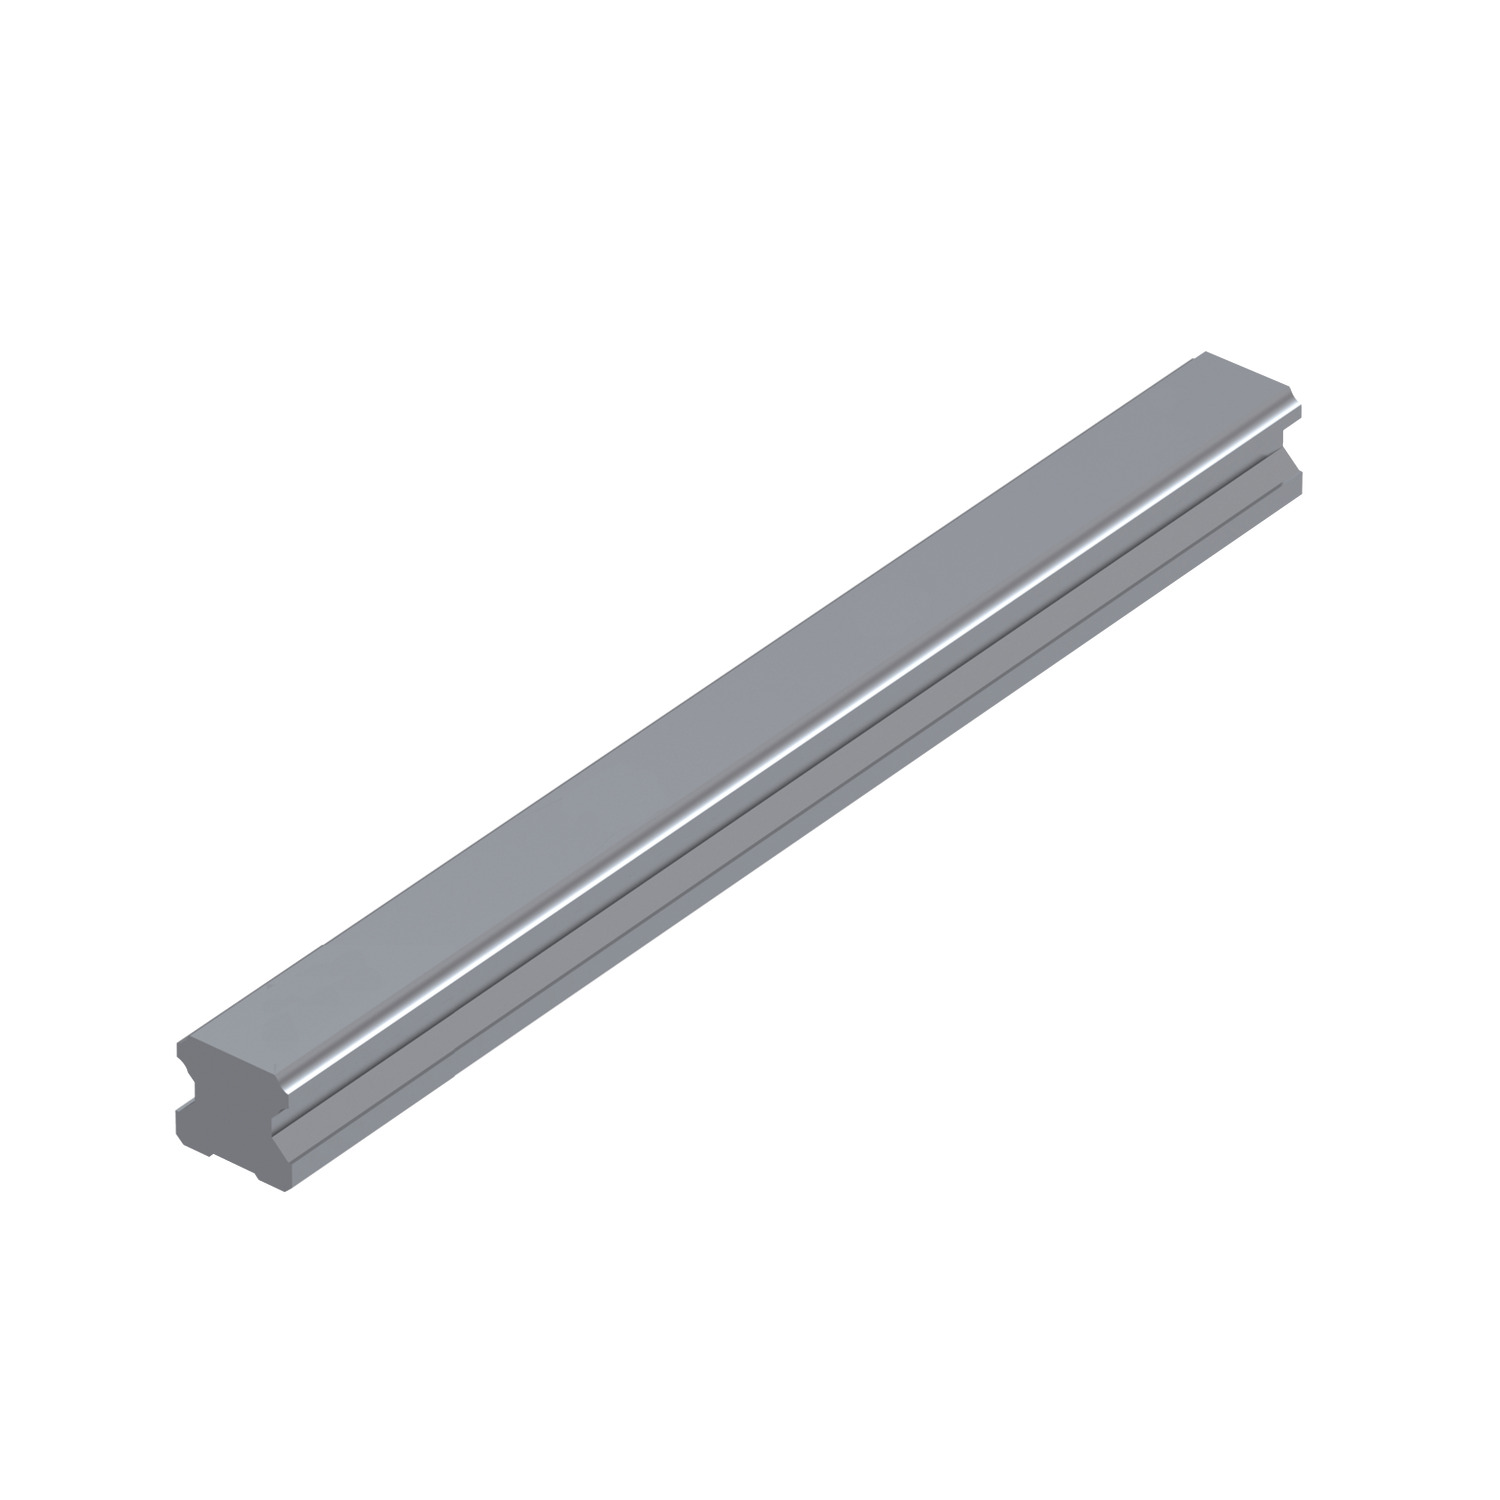 L1016.RF30-0280 Linear guide rail rear fixing 30mm 0280 Hardened and ground steel. EC:20167981 WG:05063055296632